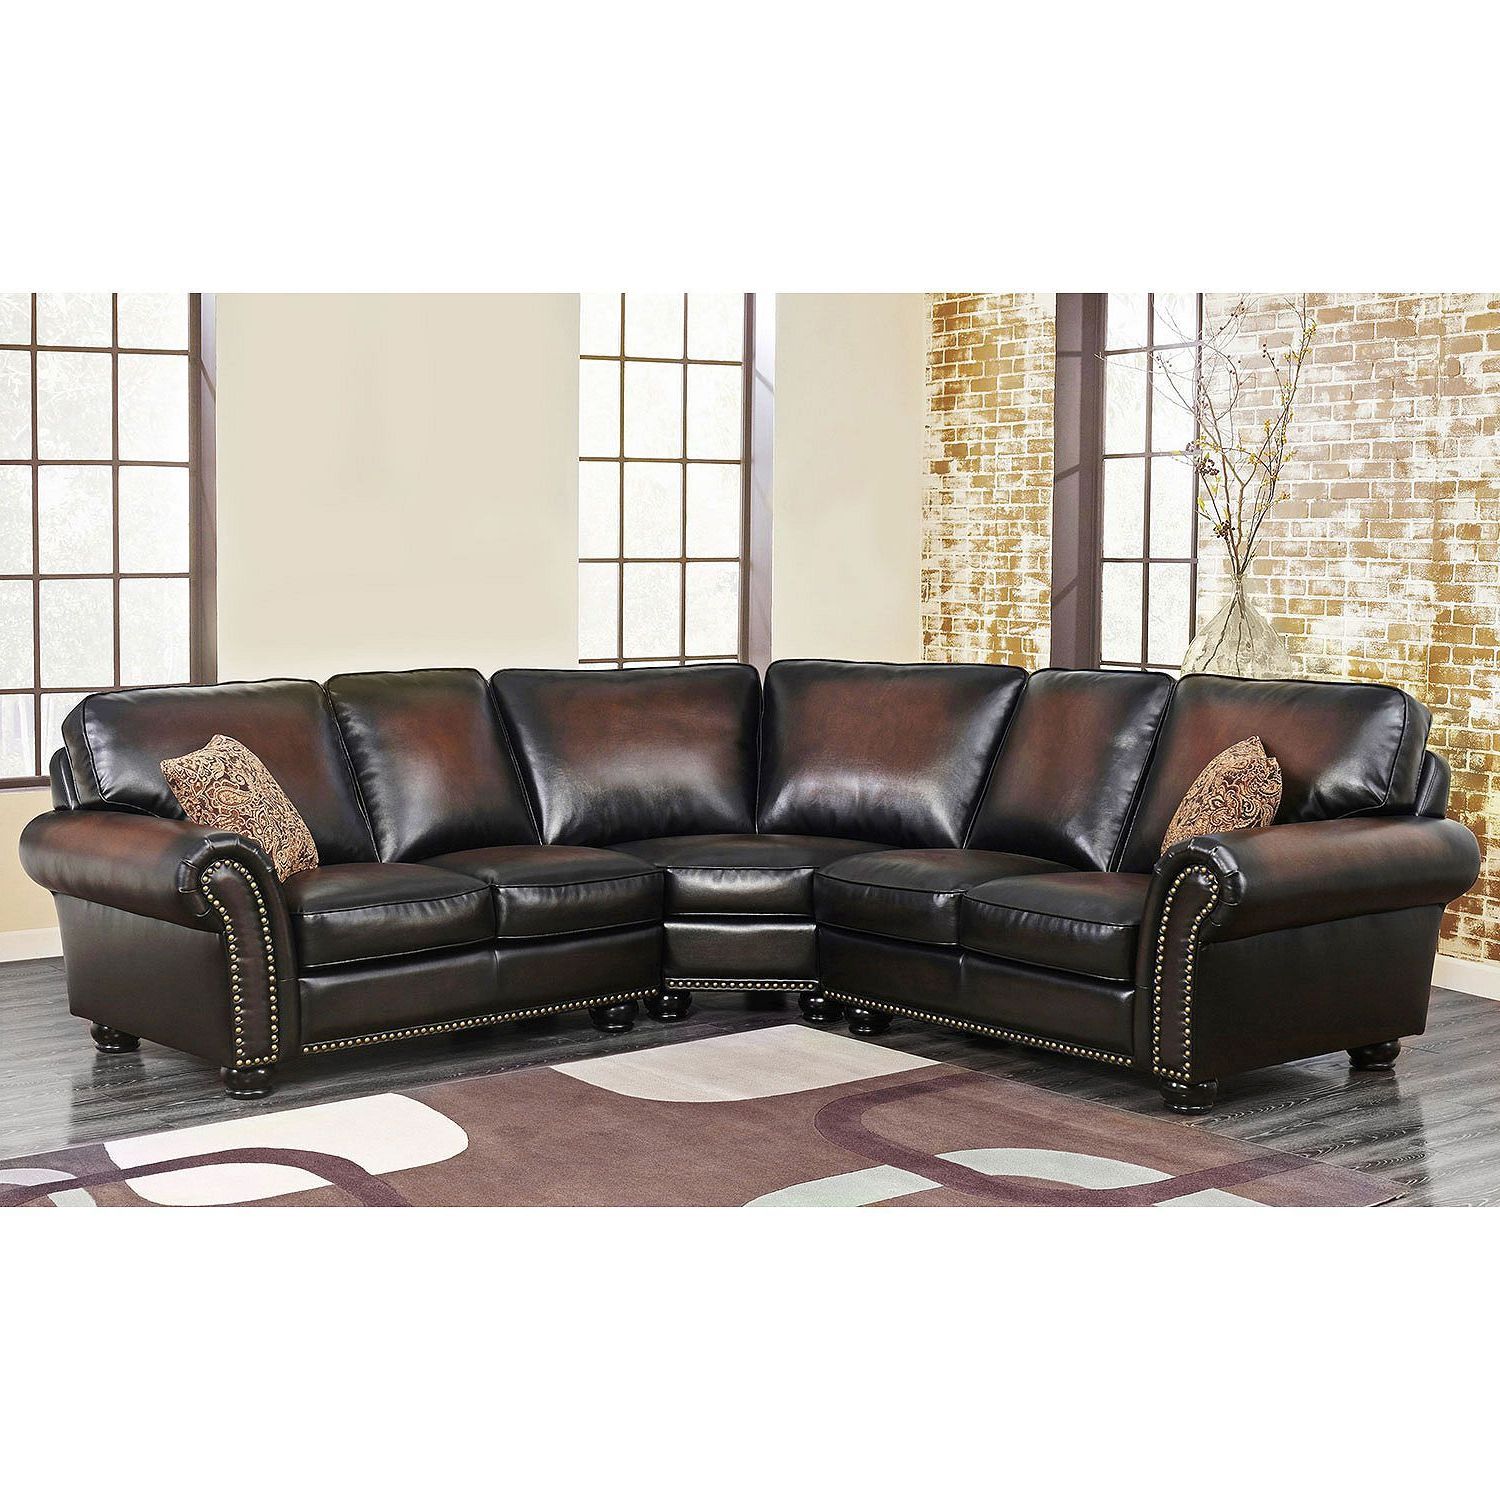 Melrose Leather 3 Piece Sectional – Sam's Club Inside Famous 3 Piece Leather Sectional Sofa Sets (View 9 of 15)